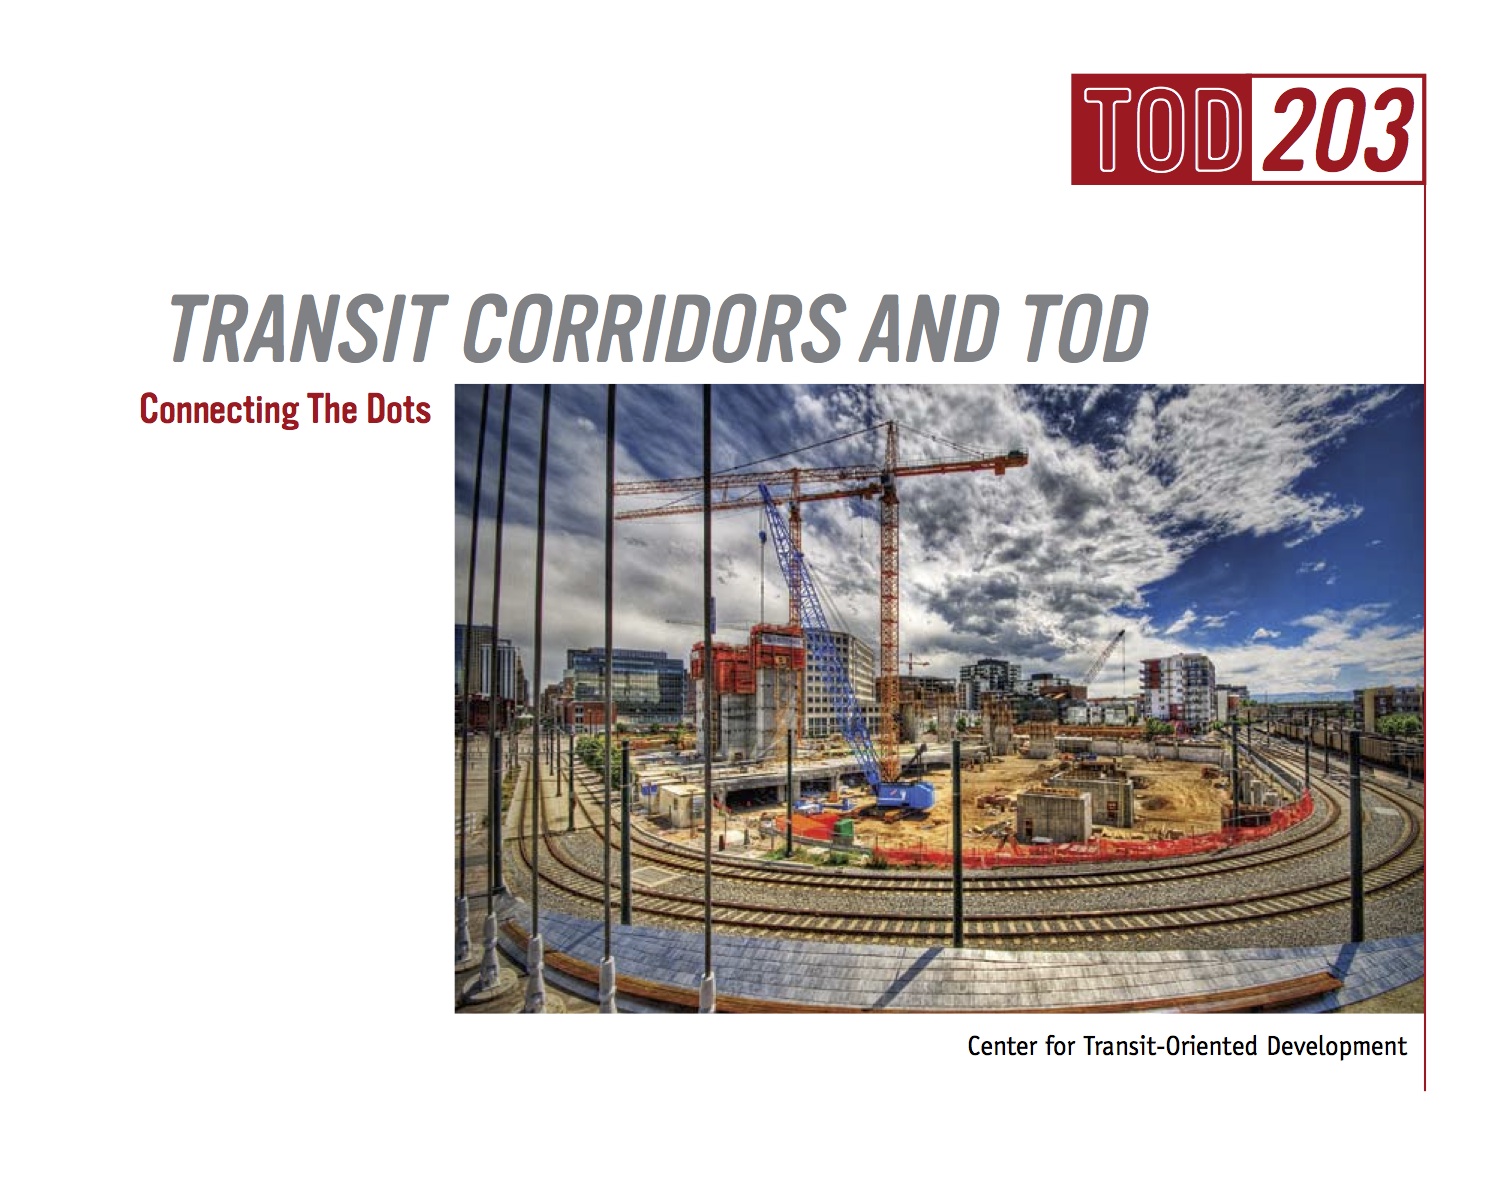 TOD 203 – Transit Corridors and TOD: Connecting the Dots